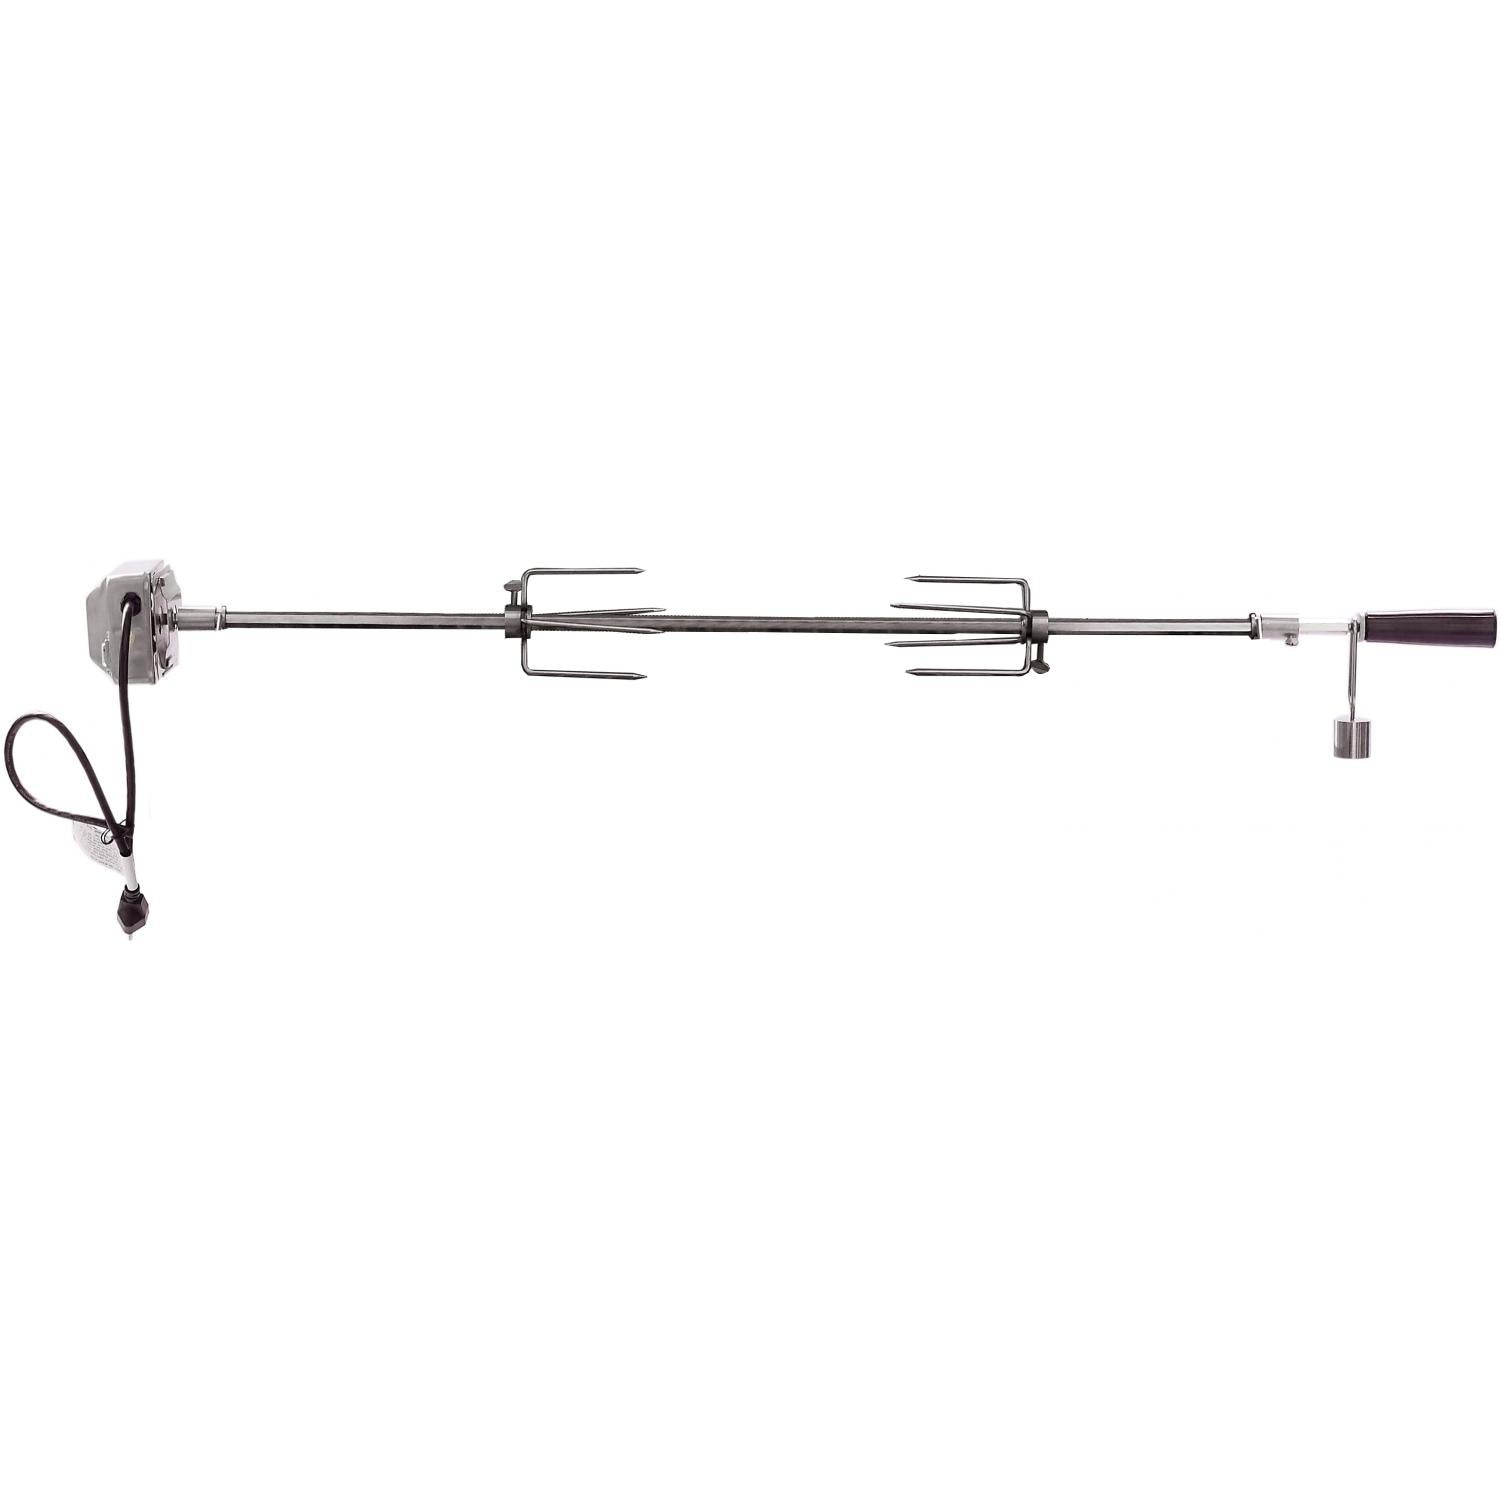 Coyote Rotisserie Kit For 36-Inch Gas & Charcoal Grills - 